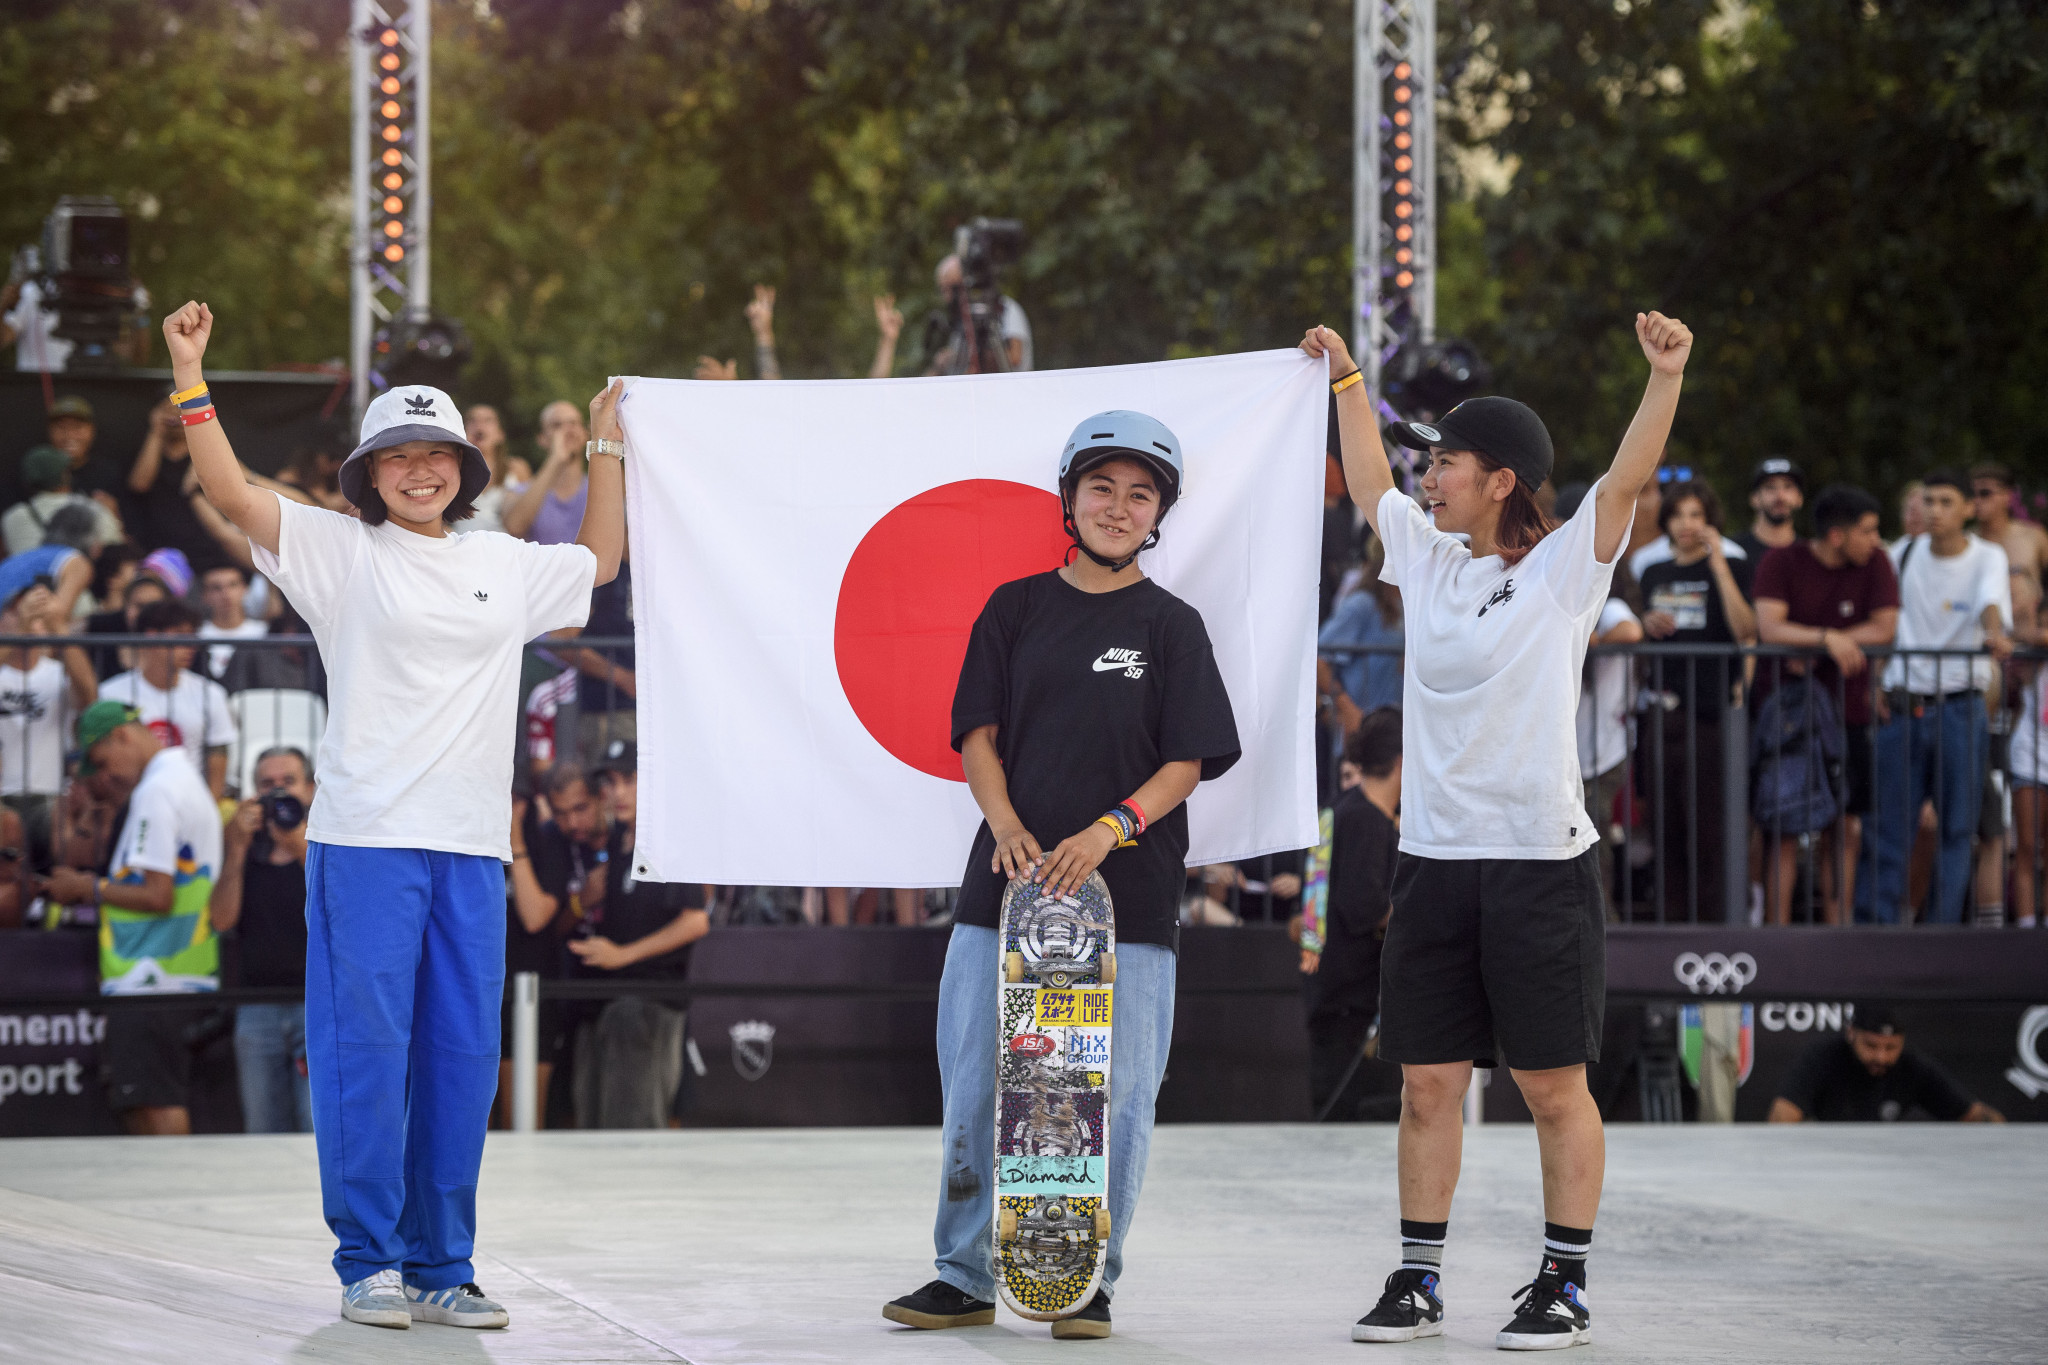 Funa Nakayama led an all-Japanese podium today at the World Street Skateboarding event in Rome ©Getty Images